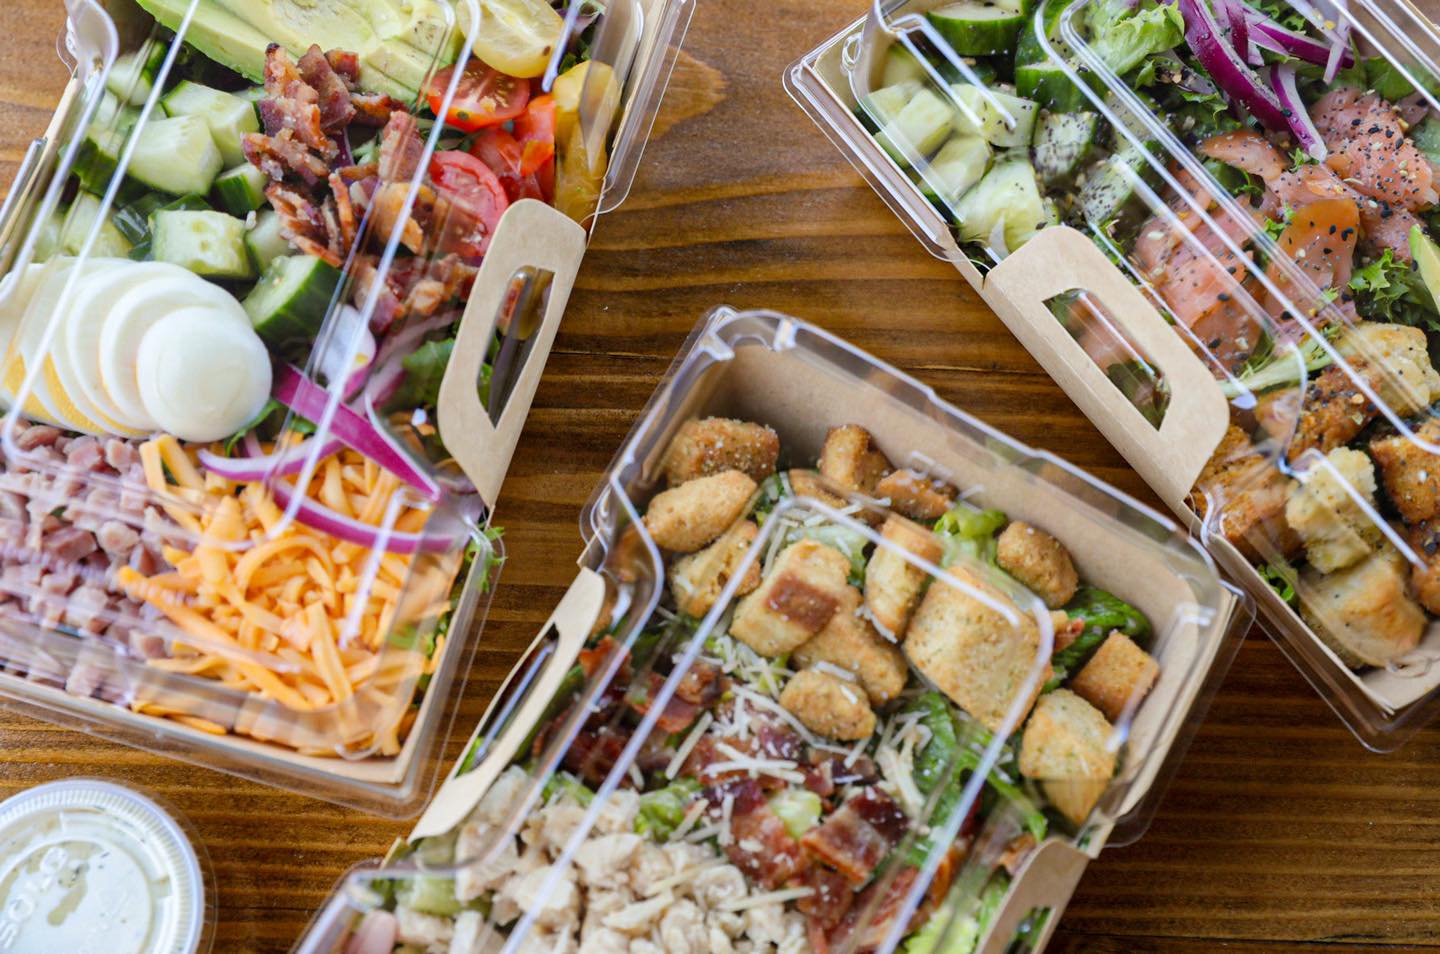 Salads from Lindsay's Kitchen in to-go containers